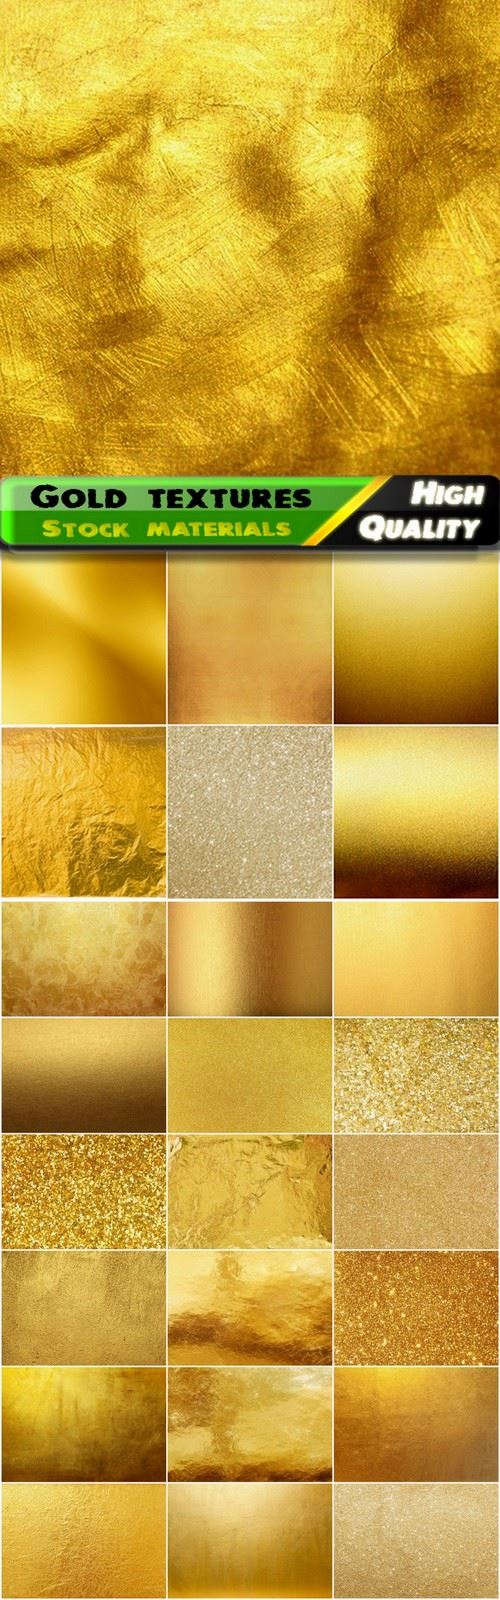 Gold textures and glitter backgrounds - 25 HQ Jpg